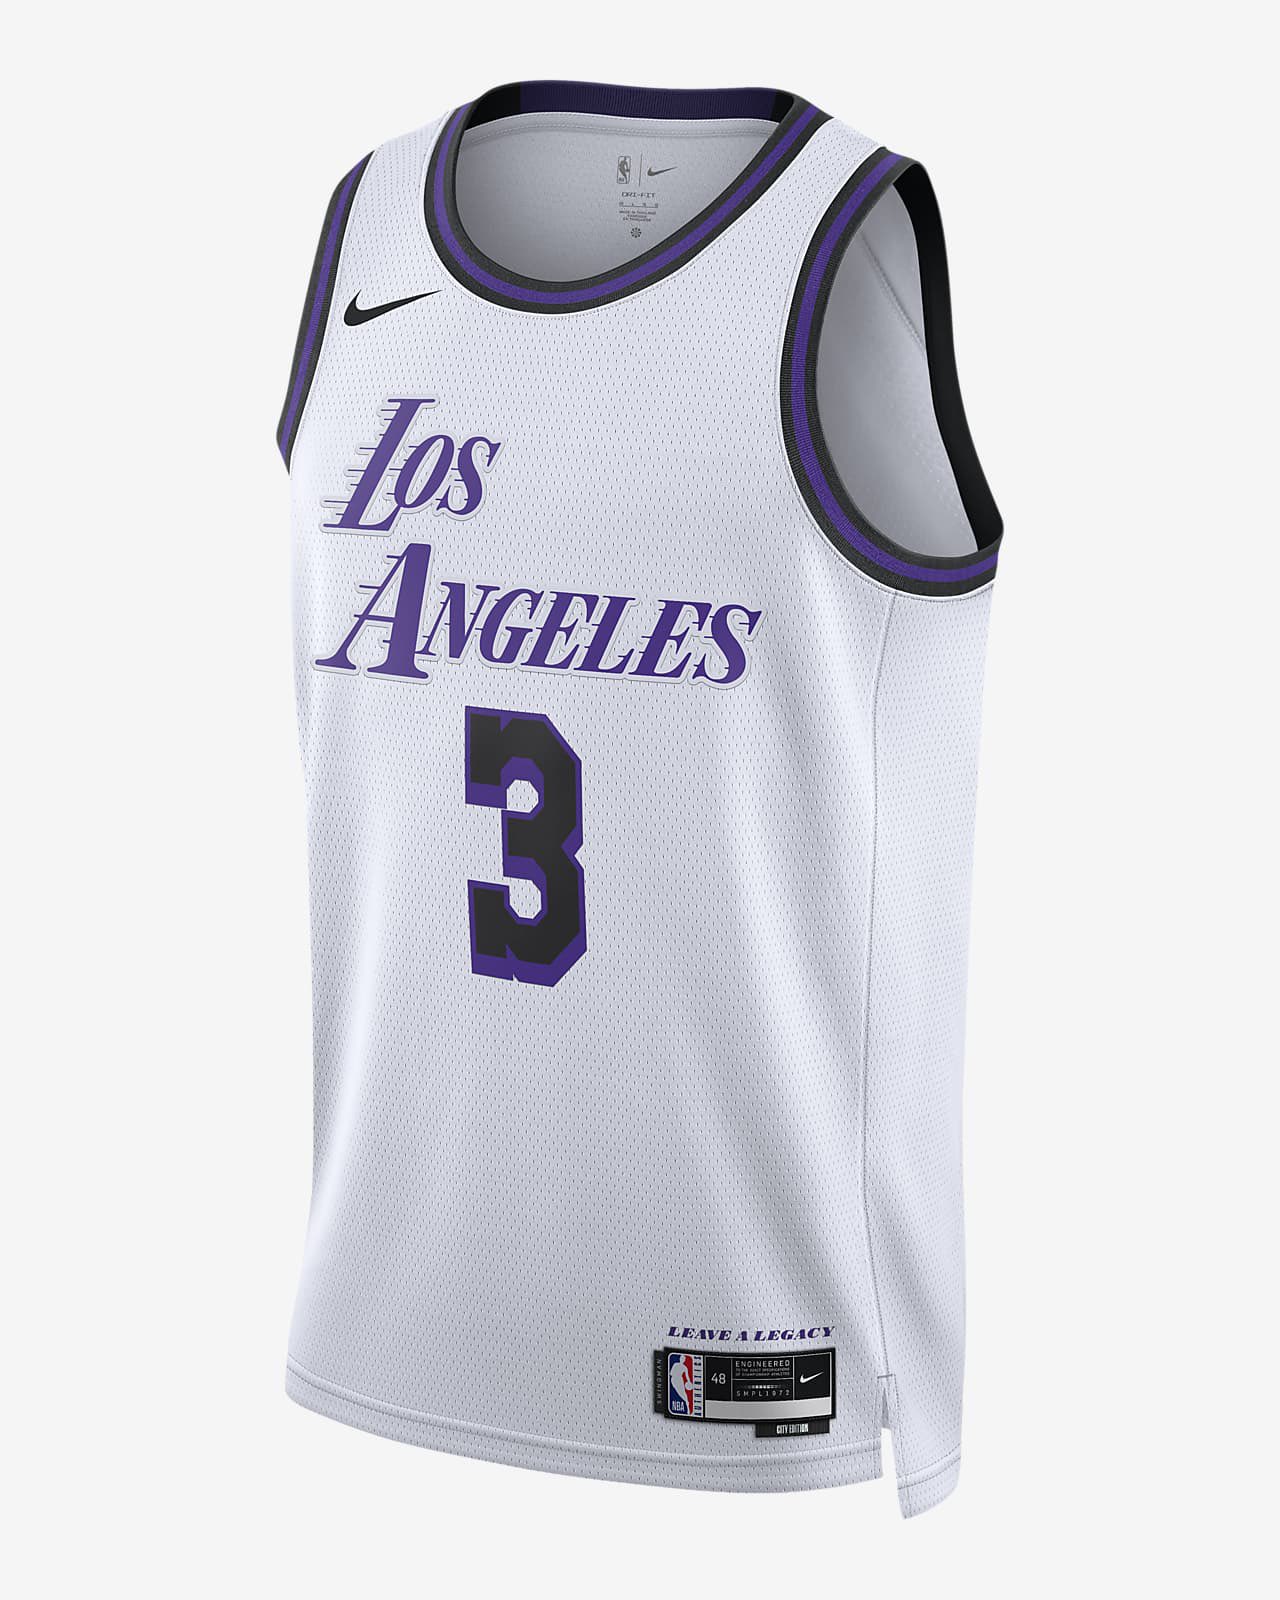 Lakers News: 2021-2022 Nike City Jerseys Have Leaked Online - All Lakers